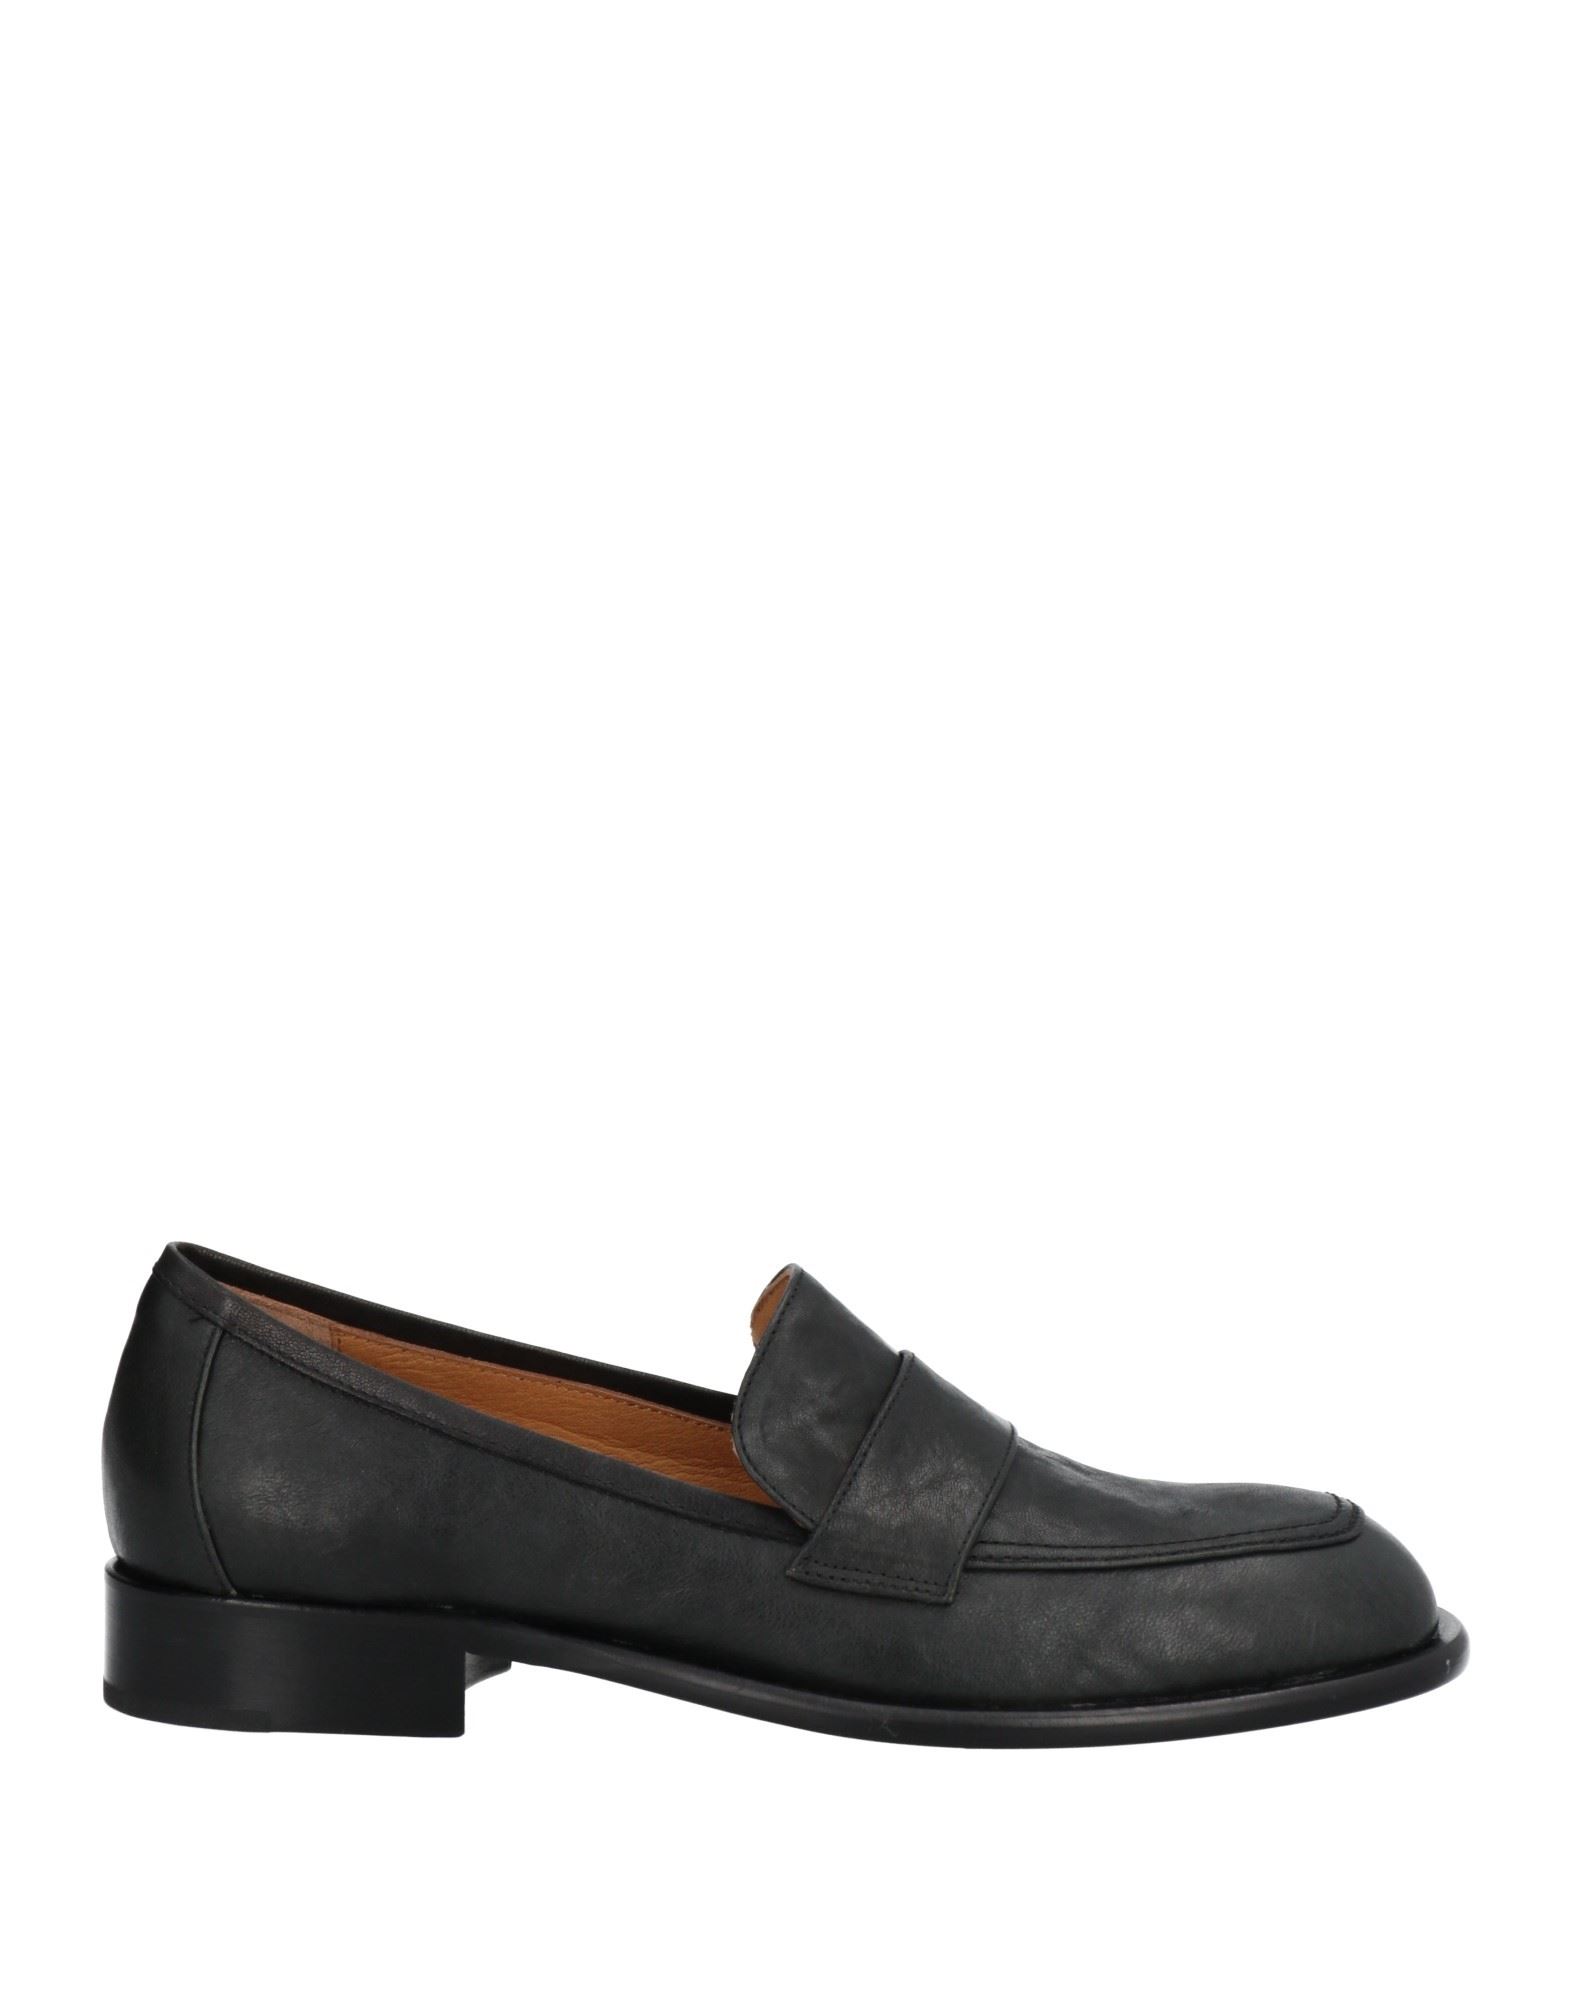 POMME D'OR Loafers | Smart Closet